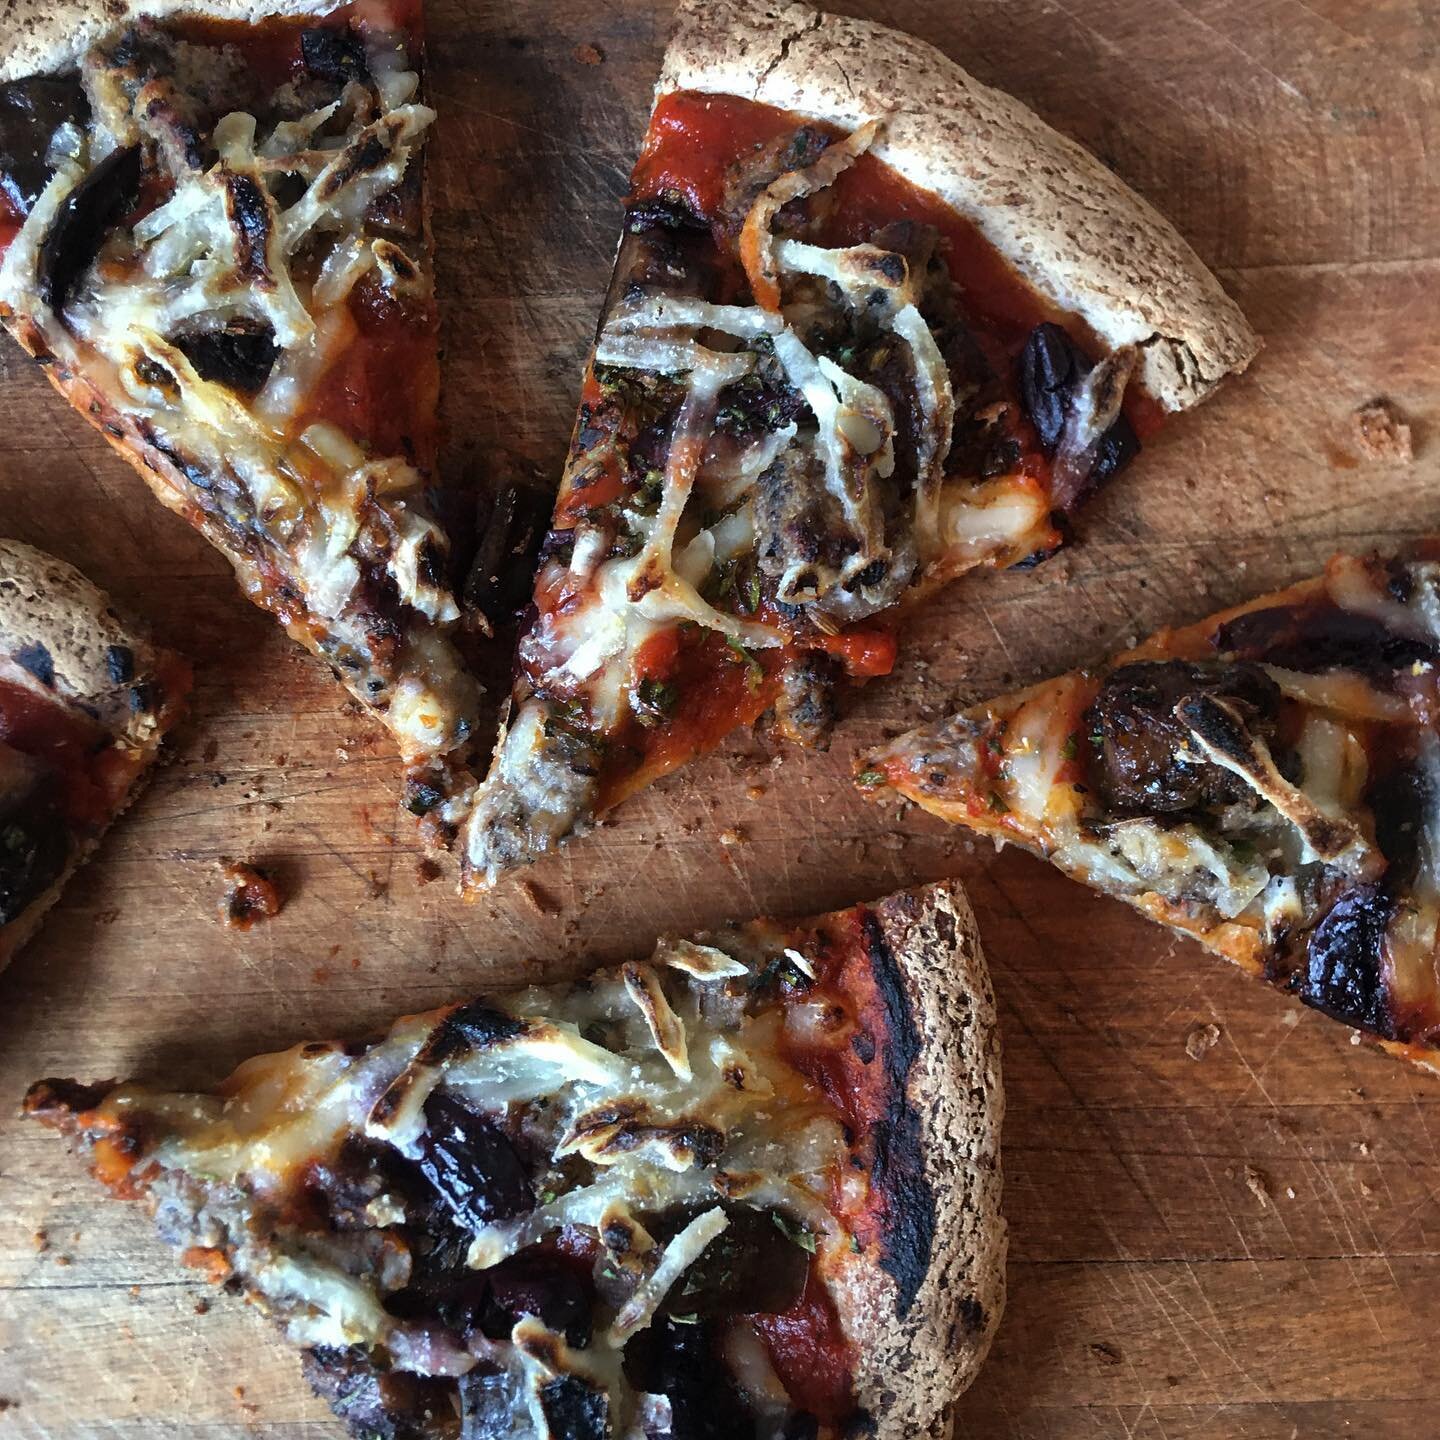 I have been perfecting my #recipe for #vegan #glutenfreepizza. This has been an ongoing project for years. As I learn more I incorporate my new knowledge and continue to perfect the old recipes. This one is topped with #eggplant #kalamataolives #vega